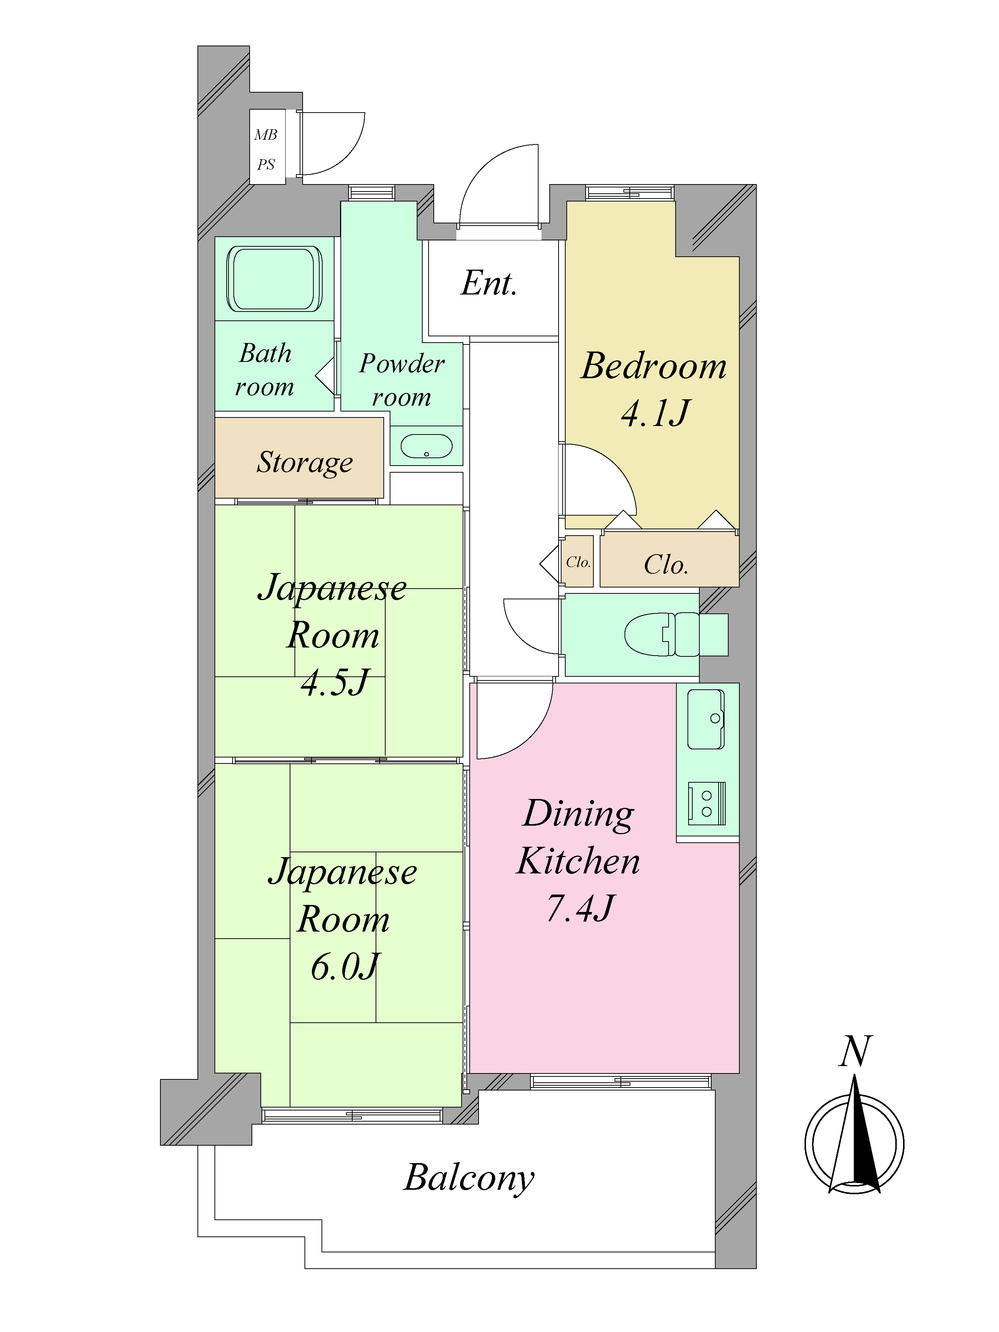 Floor plan. 3LDK, Price 12.8 million yen, Occupied area 51.81 sq m , The best part of the balcony area 8.88 sq m Japanese-style room. Questions, Preview hope customers Suteiwan Contact: We look forward to contact Matsushita 090-7093-5008.